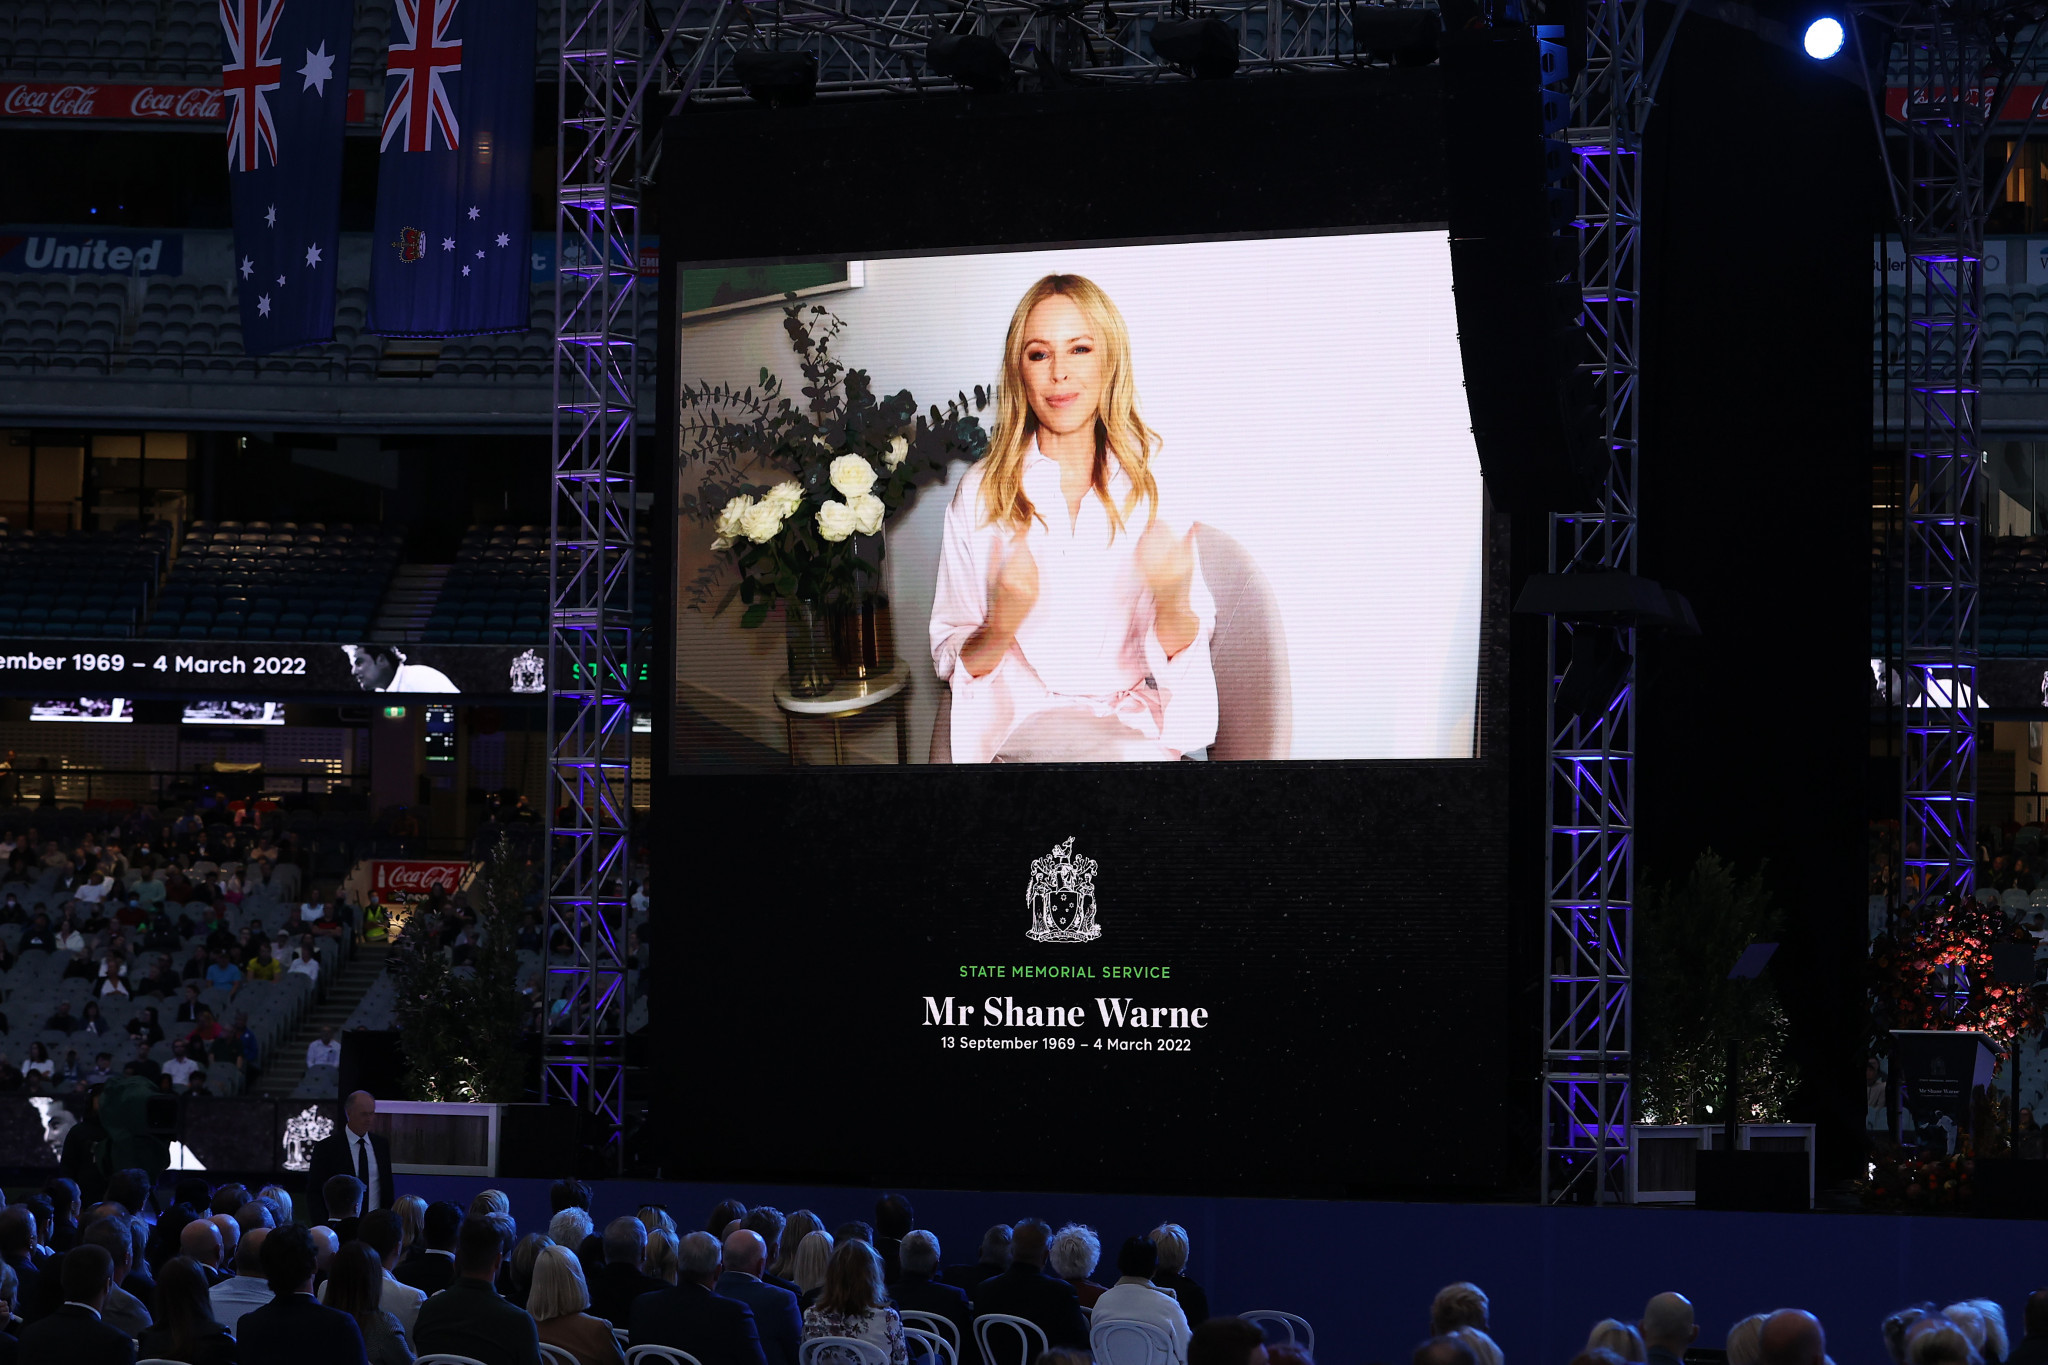 Celebrities and former team-mates join crowd of 50,000 to pay emotional tribute at Shane Warne Memorial Service